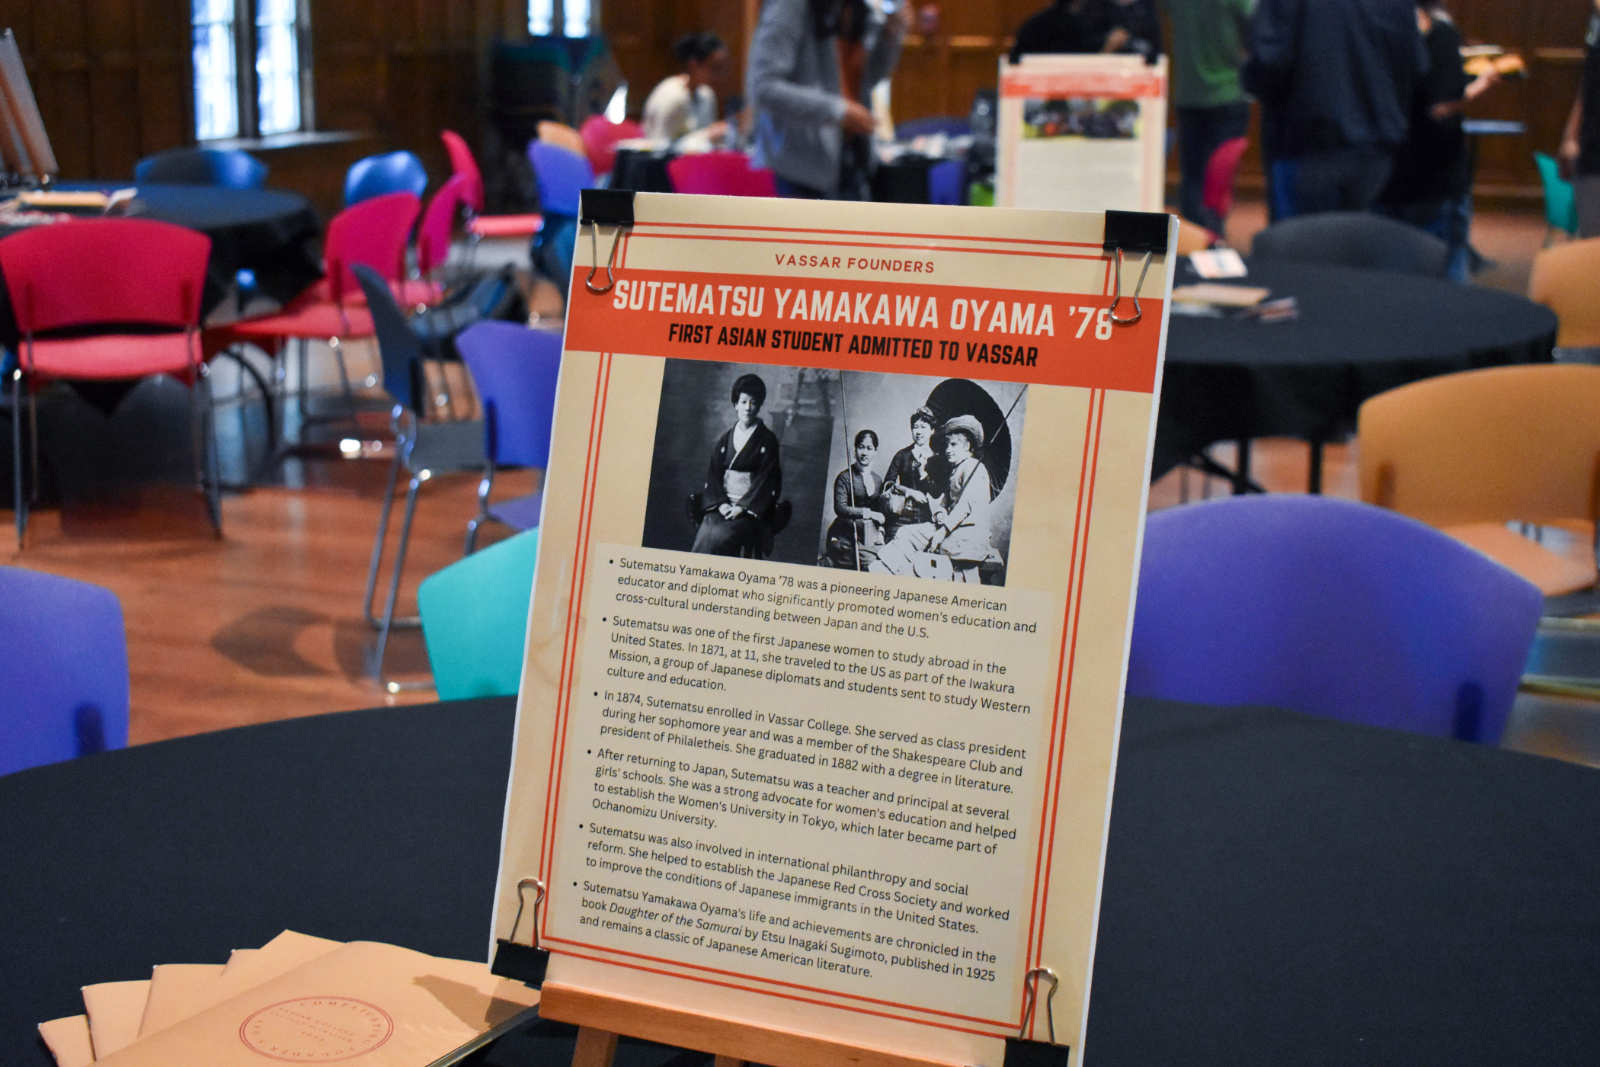 A poster placed on a table. The poster reads “Sutematsu Yamakawa Oyama '76: First Asian Student Admitted to Vassar.”